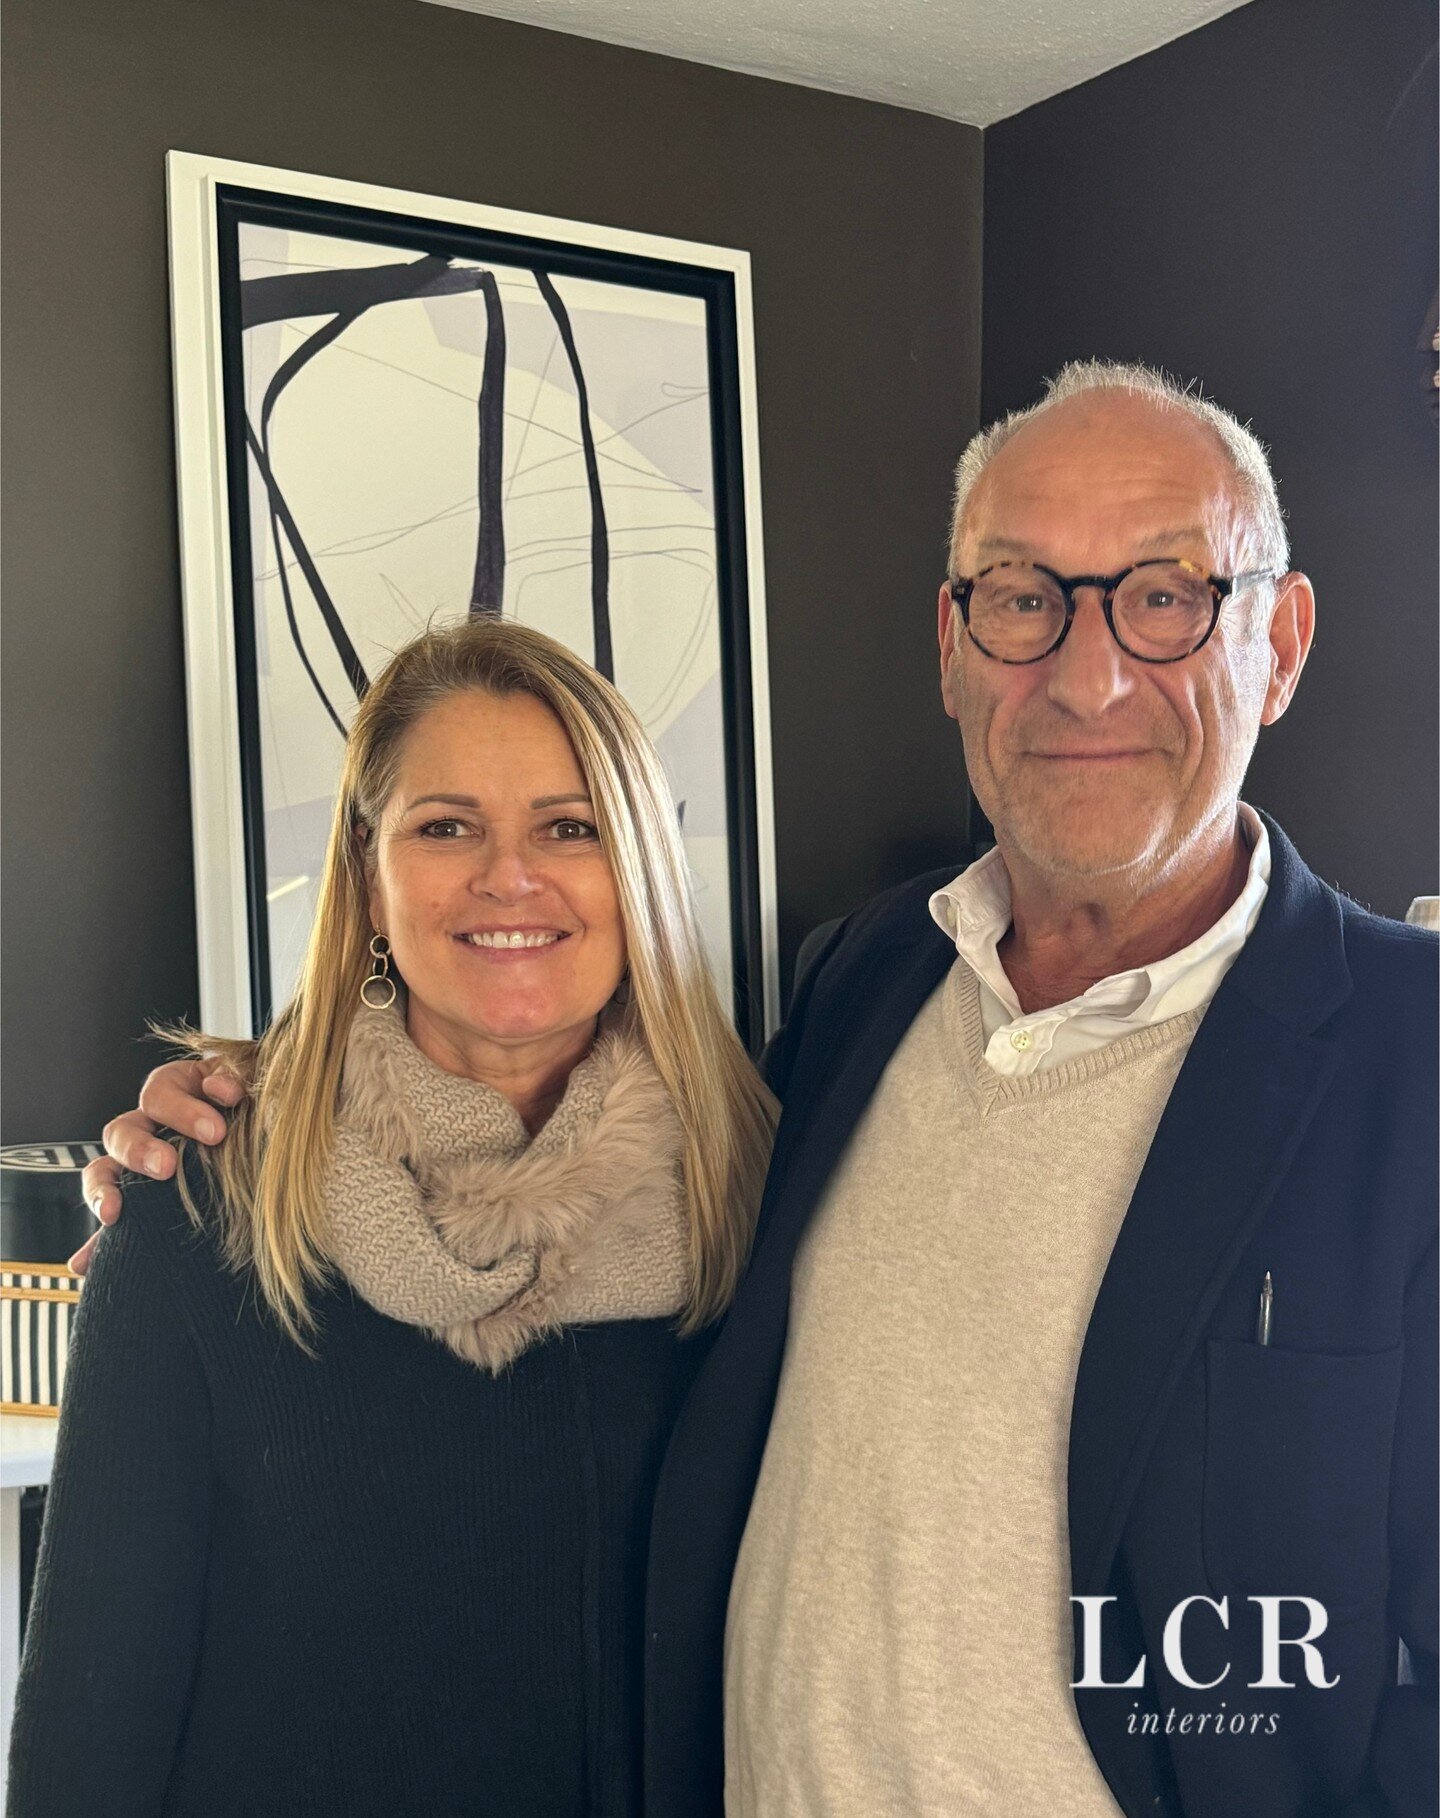 Today Natalie Real became new owner of the 57 year old design &amp; decoration firm of LCR. 

Peter Robbin, second owner of 37 years after John LaFalce began the business, will remain as Principal Designer. LCR Interiors also welcomes several new des